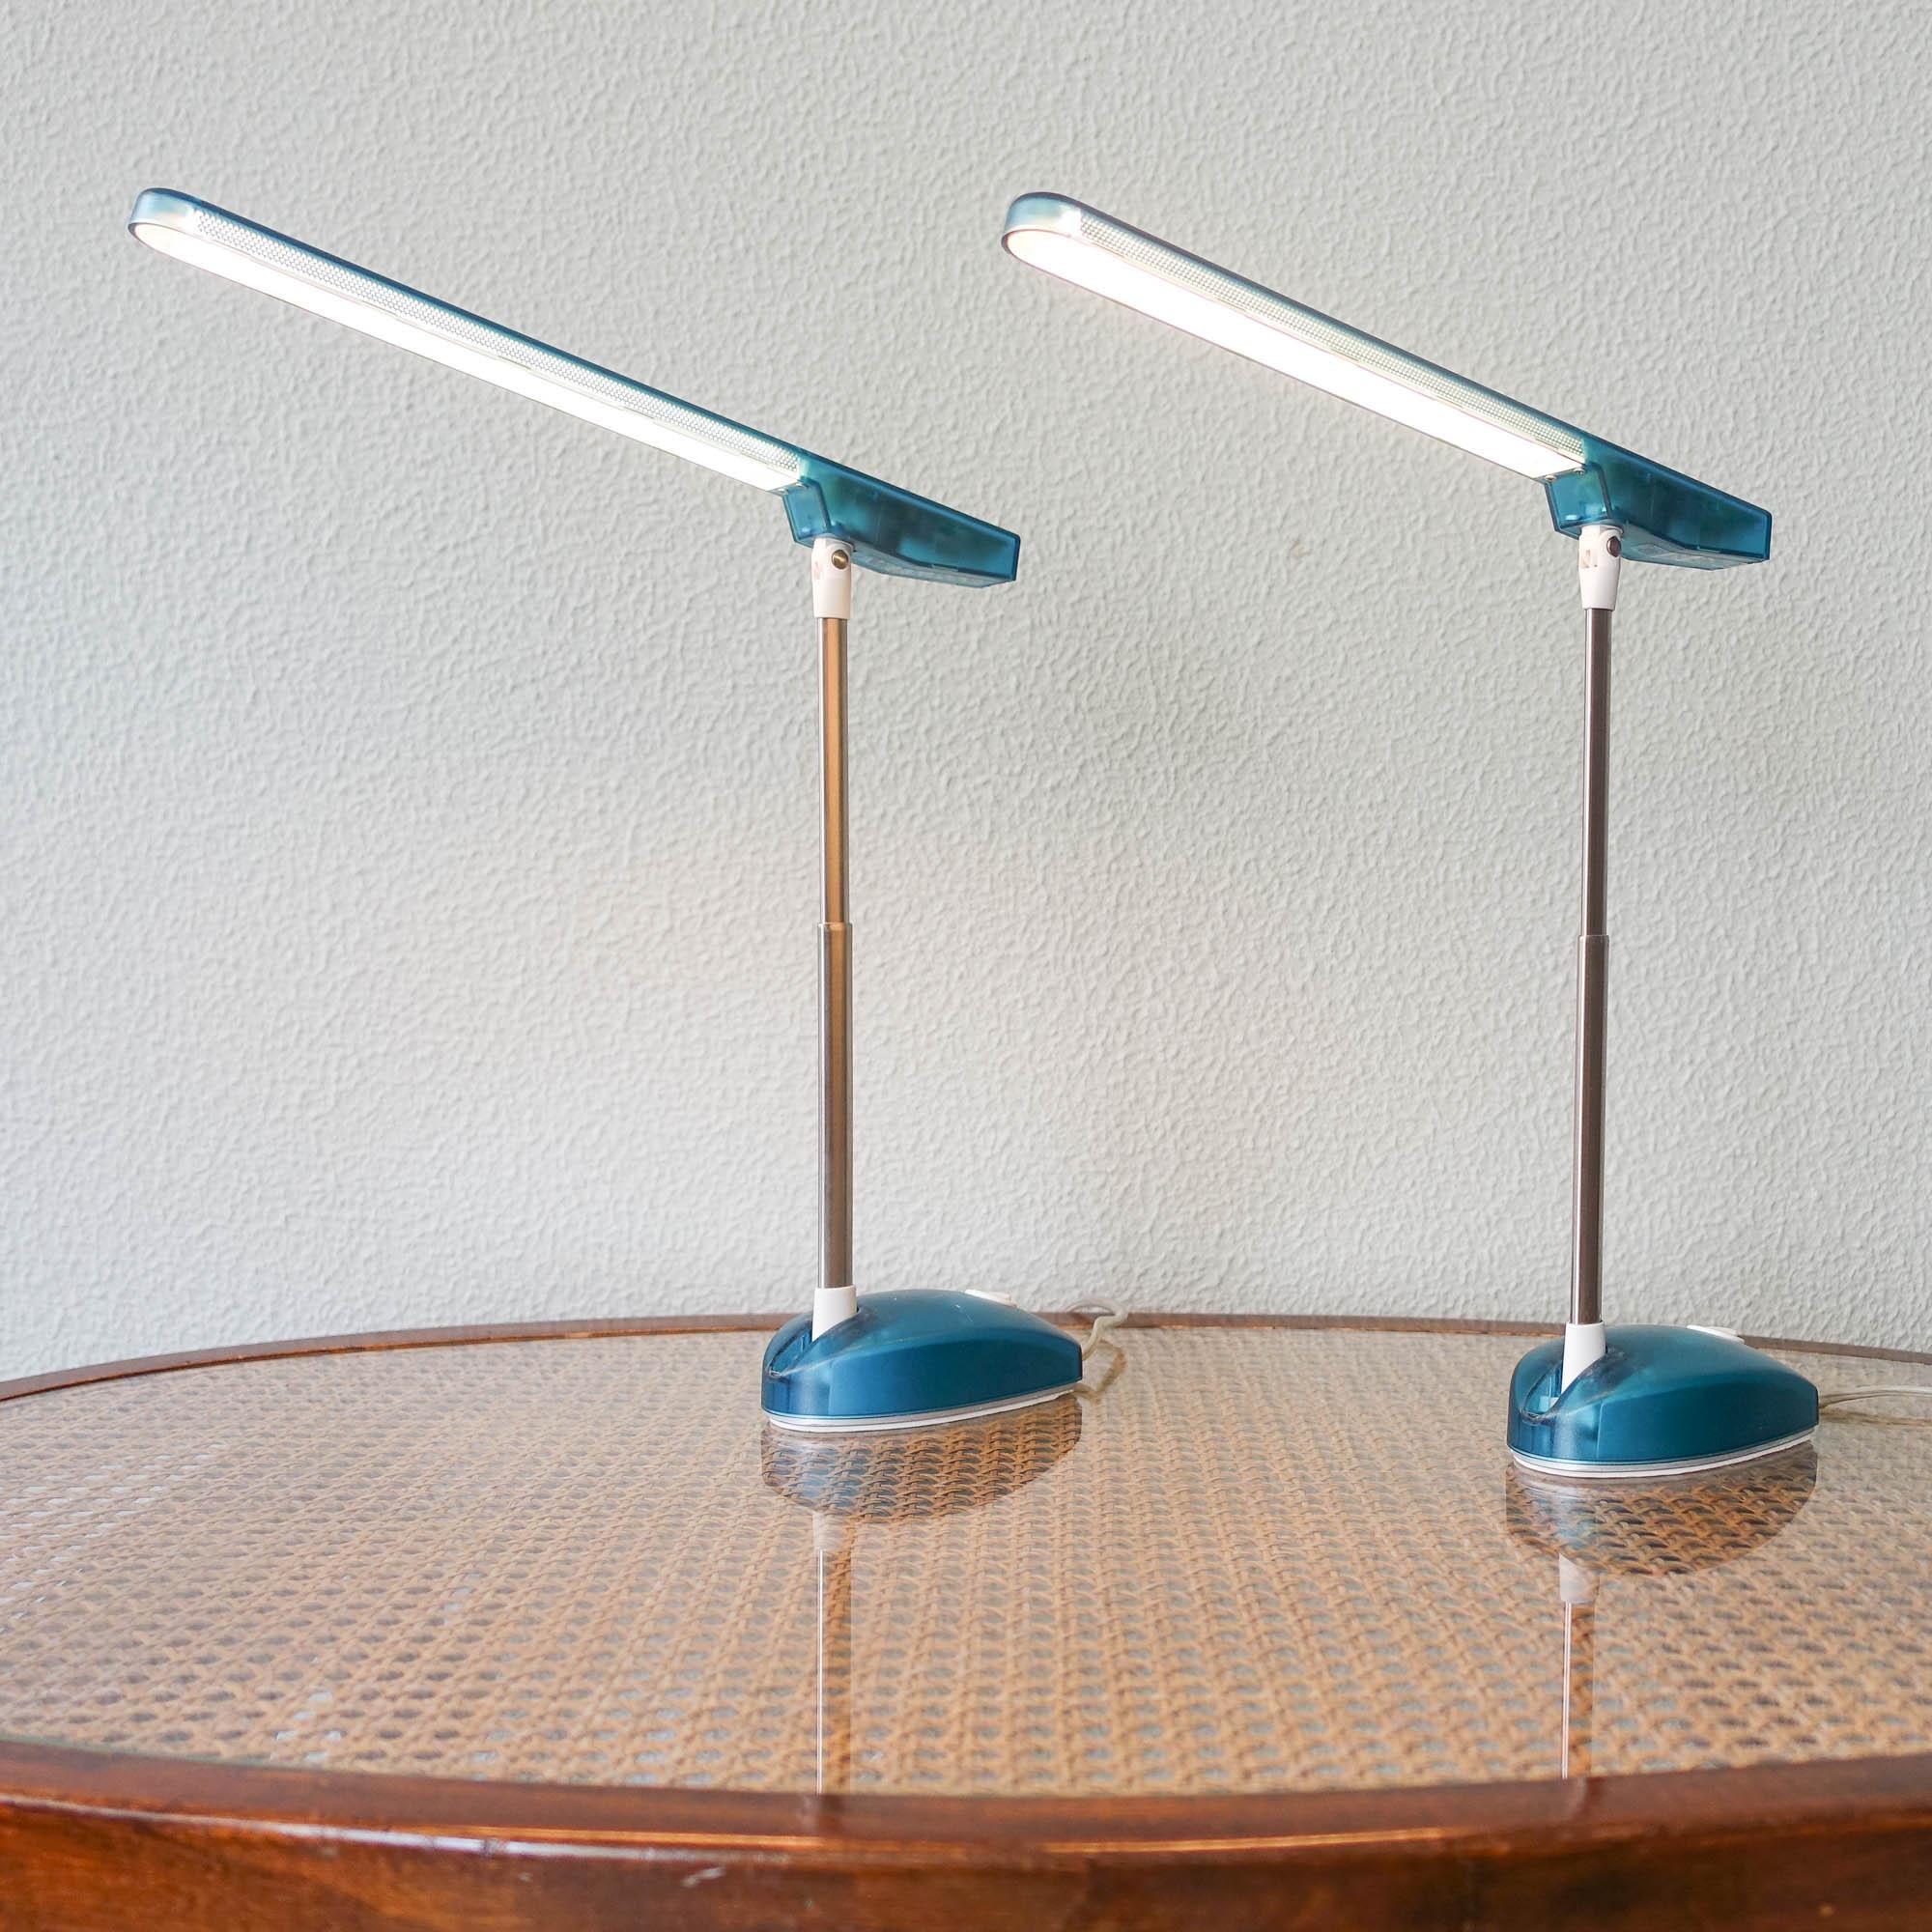 This pair of table lamps, model Microlight, were designed by Ernesto Gismondi for Artemide, during the 1990's. It is a very technical design of the 90s. This flexible table lamp is predestined for screen workstations because of its special light